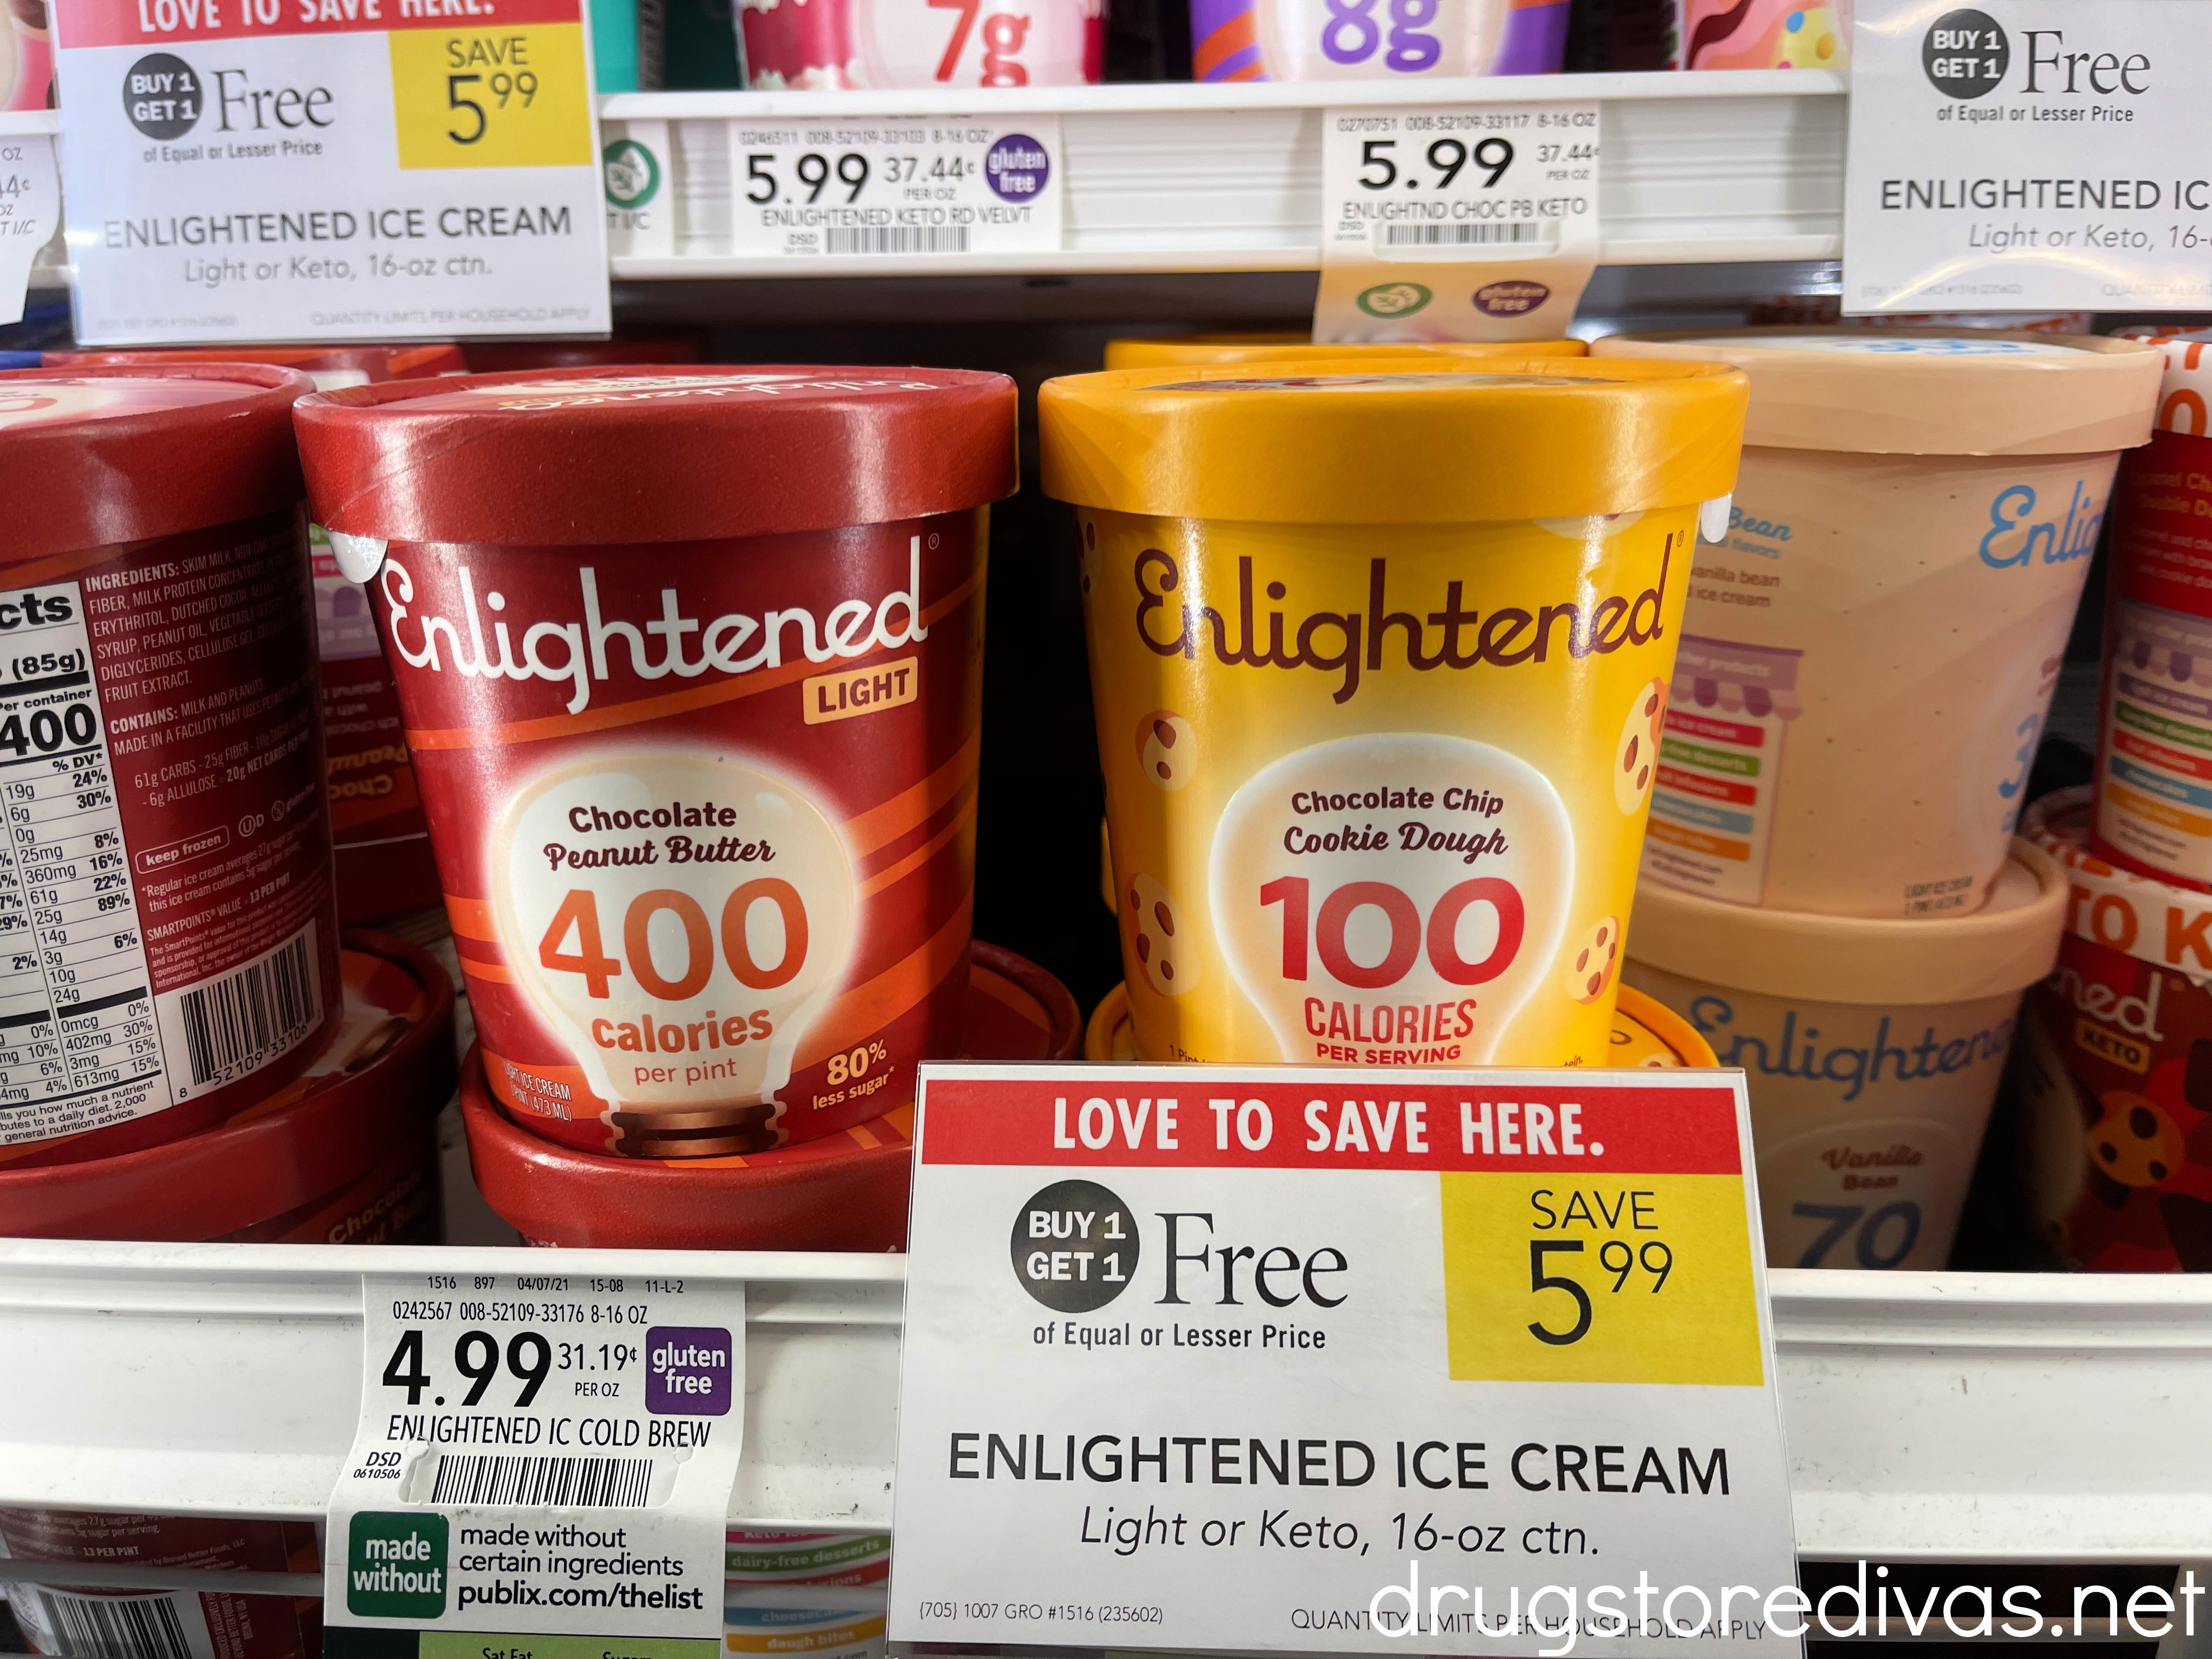 Enlightened Ice Cream pints on a shelf in Publix.